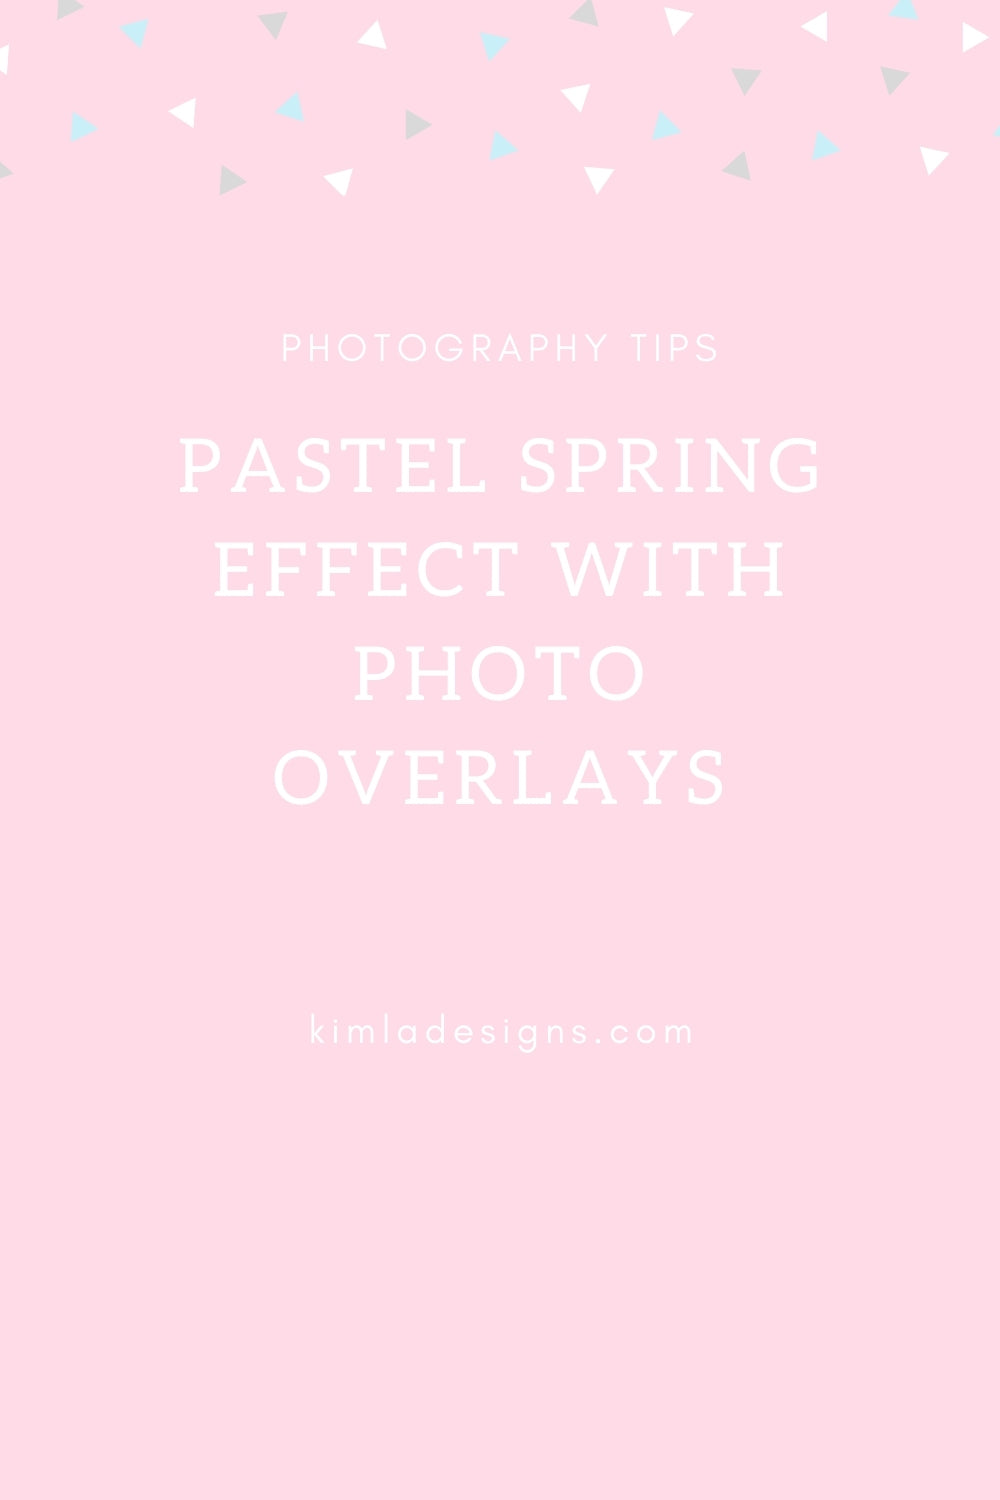 How to achieve Pastel Spring Effect with Photo Overlays quick Photoshop CC Tutorial